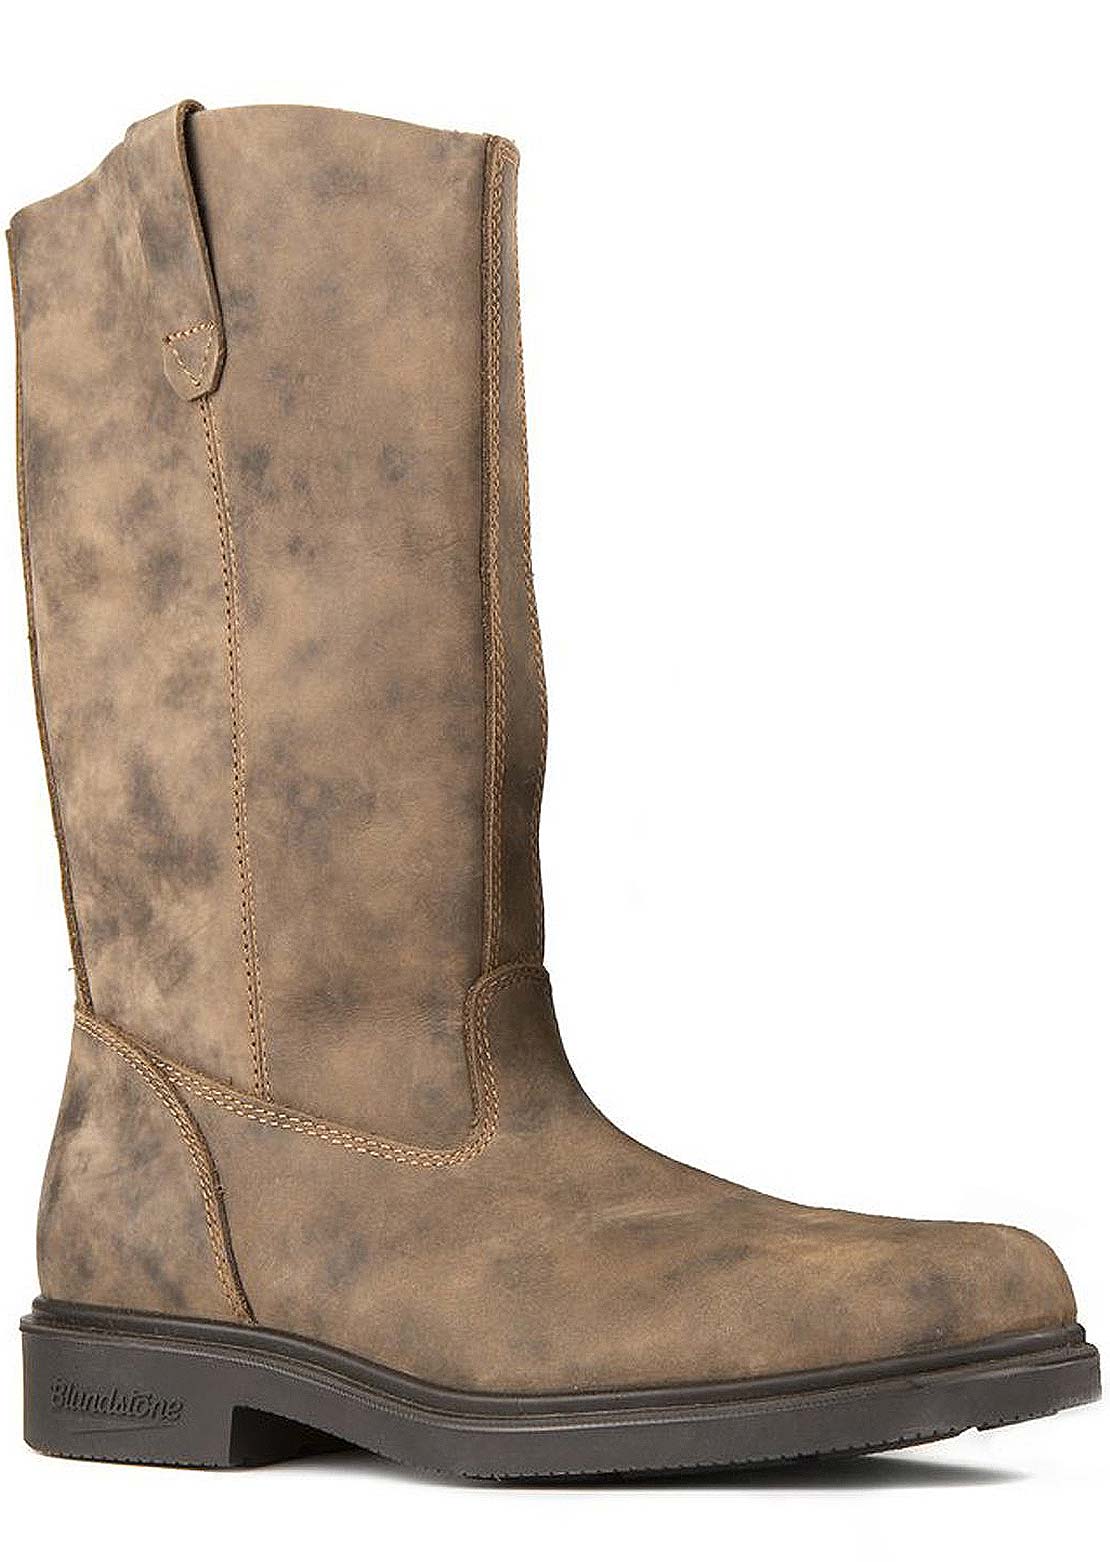 Blundstone 057 Dress Rigger Boots Rustic Brown